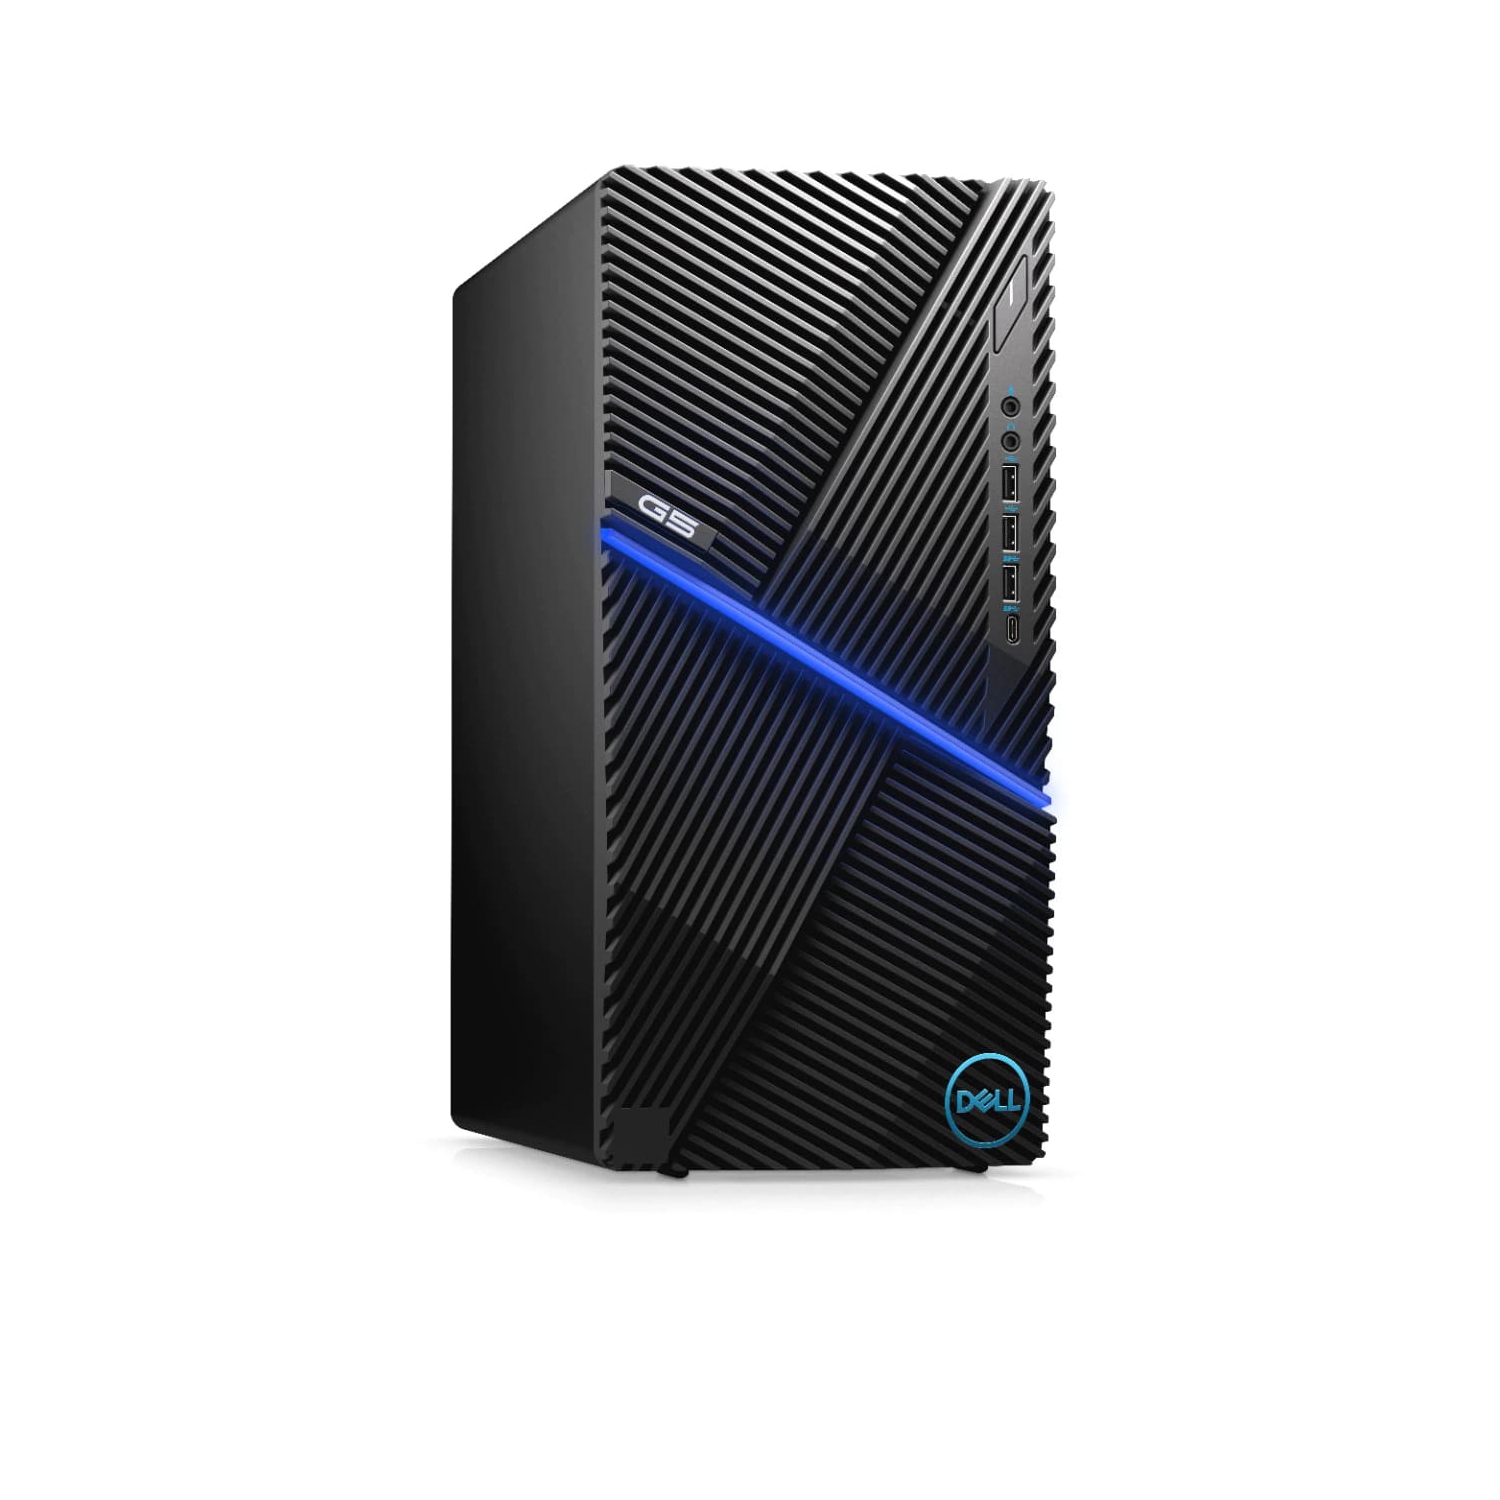 Refurbished (Excellent) - Dell G5 5000 Gaming Desktop (2020) | Core i7 - 1TB HDD + 256GB SSD - 32GB RAM - 1660 Ti | 8 Cores @ 5.1 GHz - 10th Gen CPU Certified Refurbished